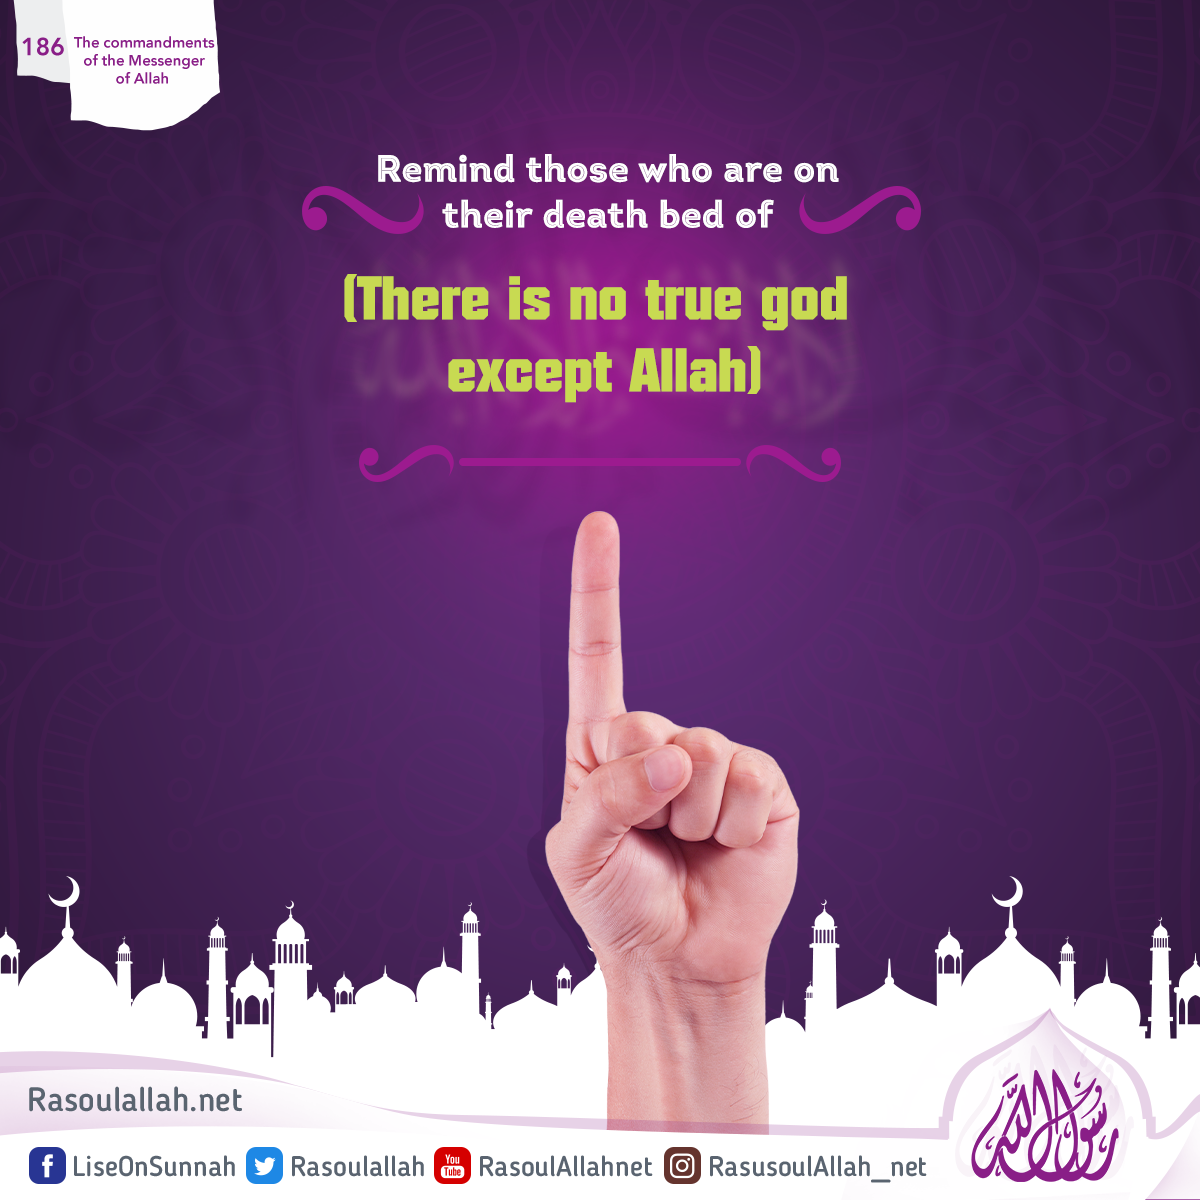 photo_Remind those who are on their death bed of (There is no true god except Allah)